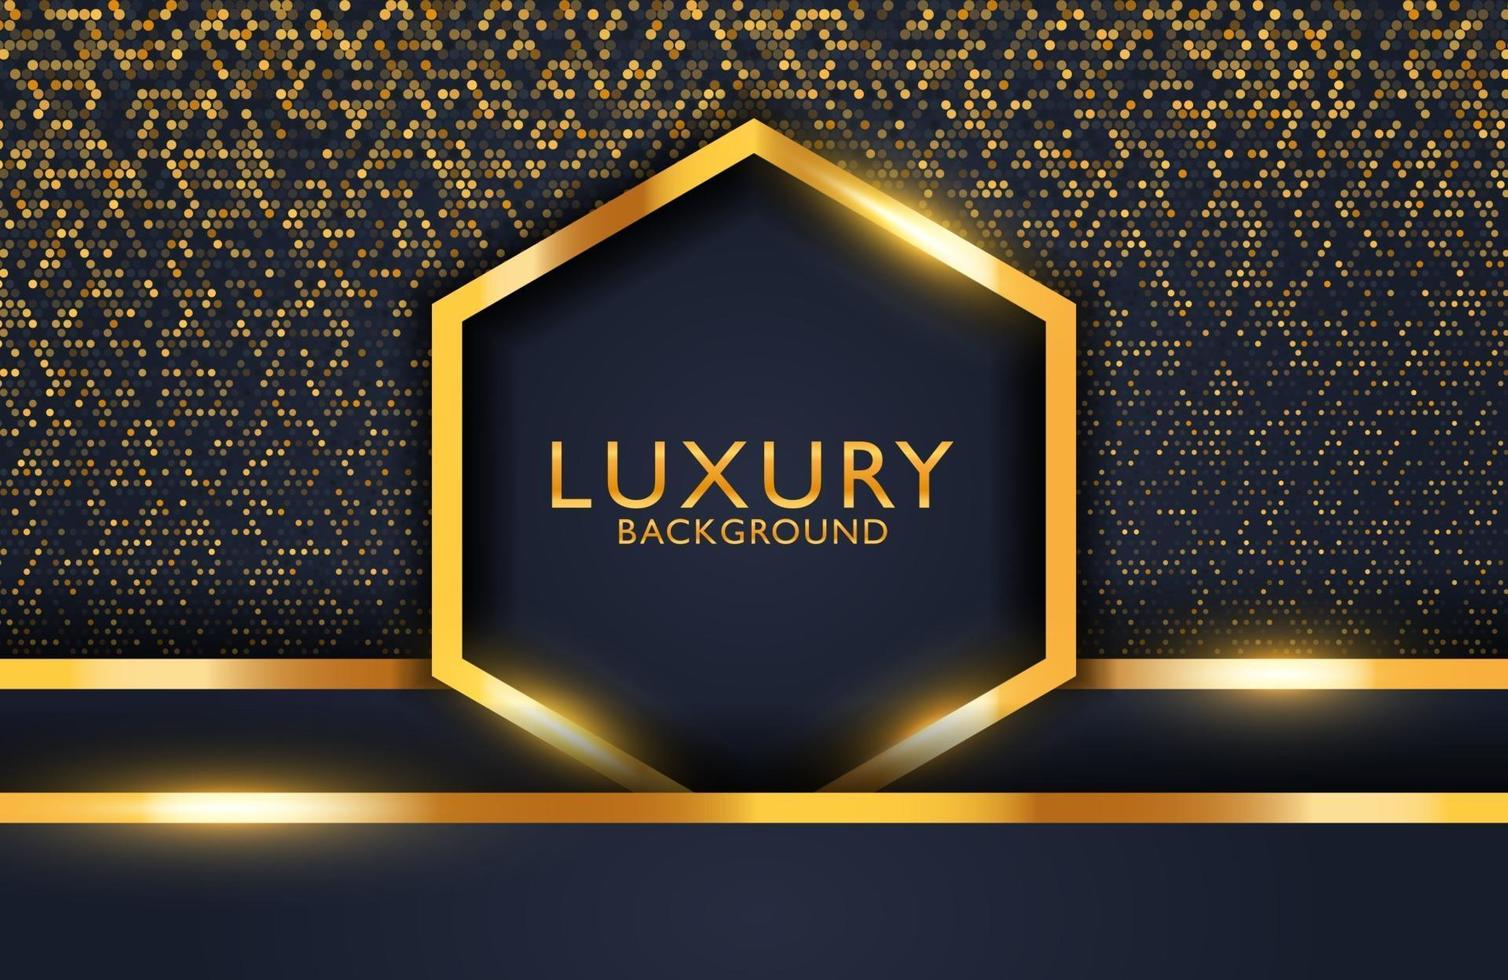 Luxury elegant background with black gold hexagon and shimmering glitter pattern. Business presentation layout vector